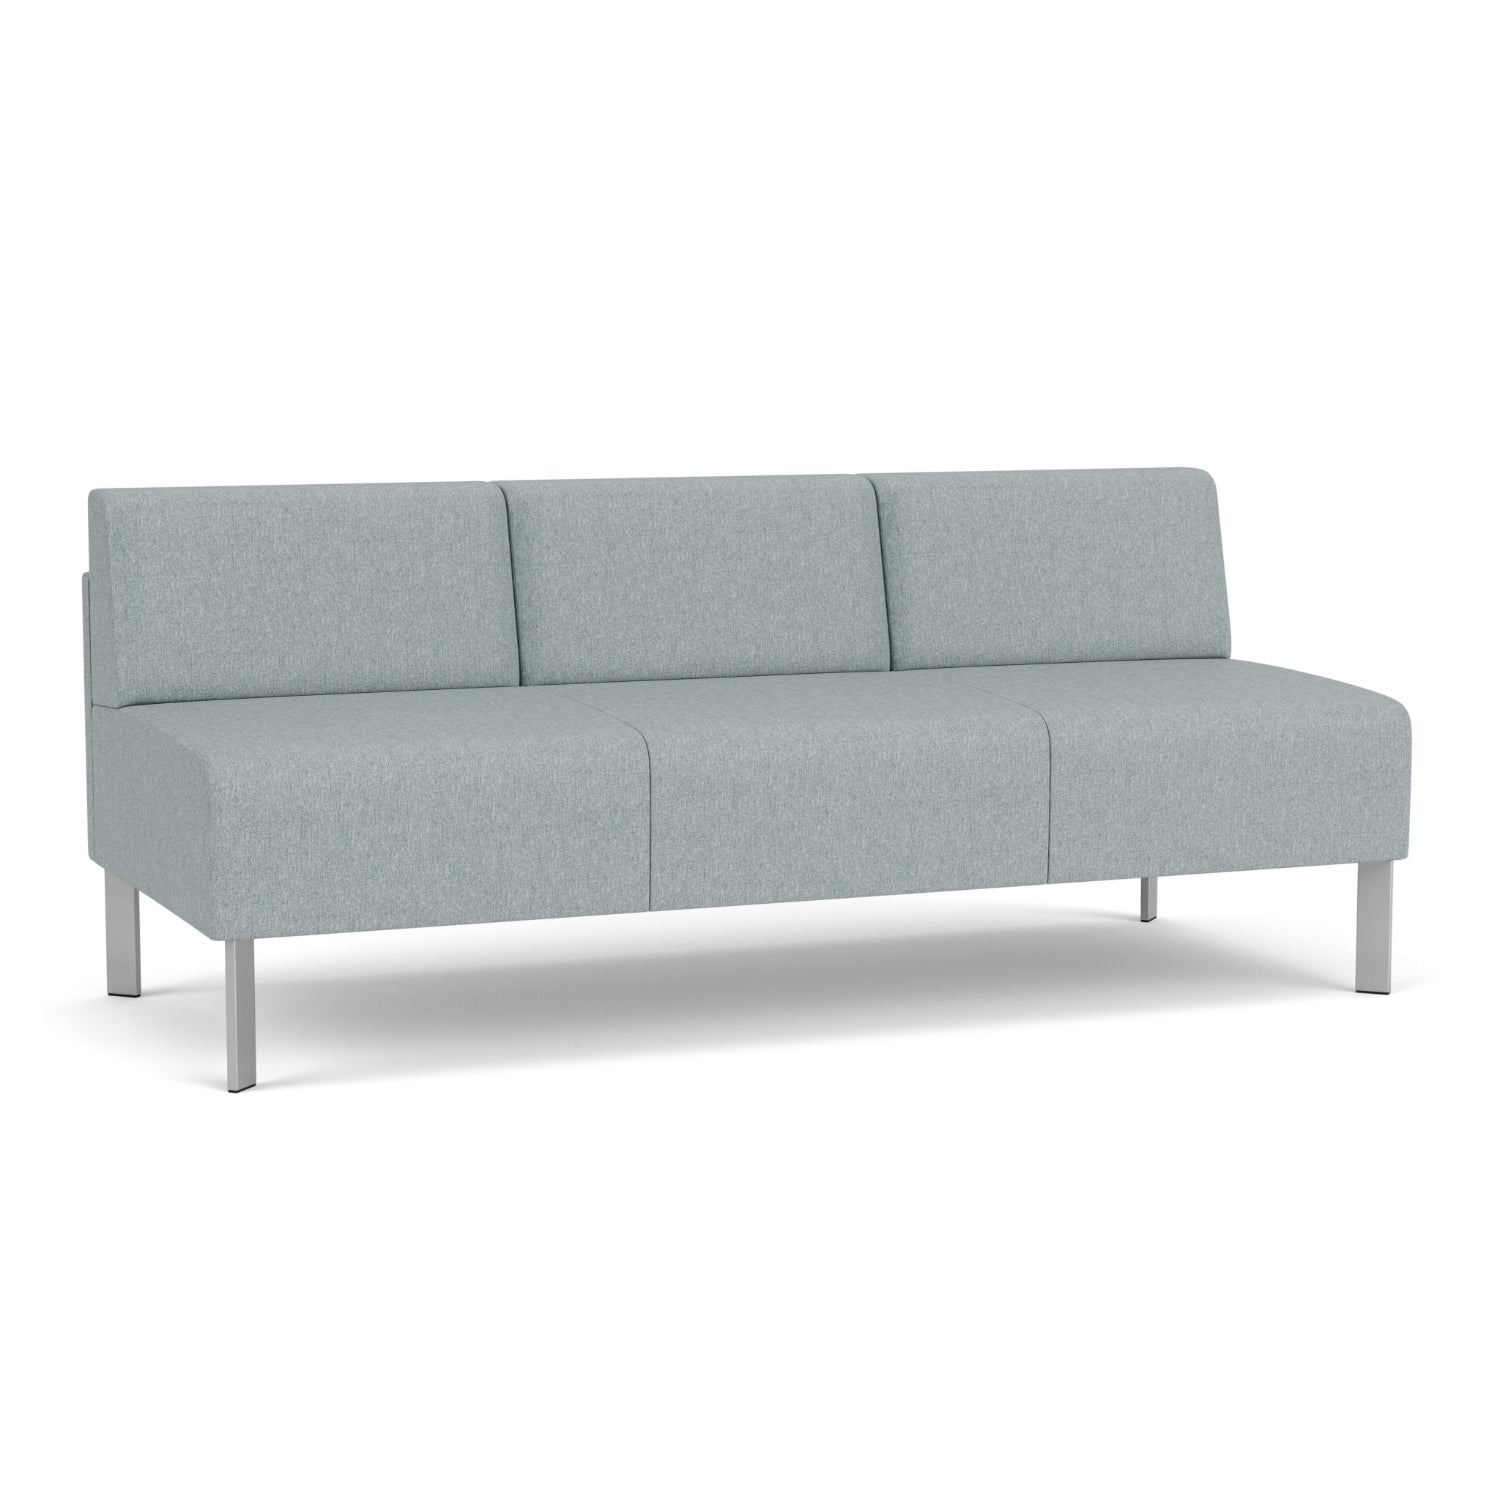 Luxe Collection Reception Seating, Armless Sofa, Healthcare Vinyl Upholstery, FREE SHIPPING